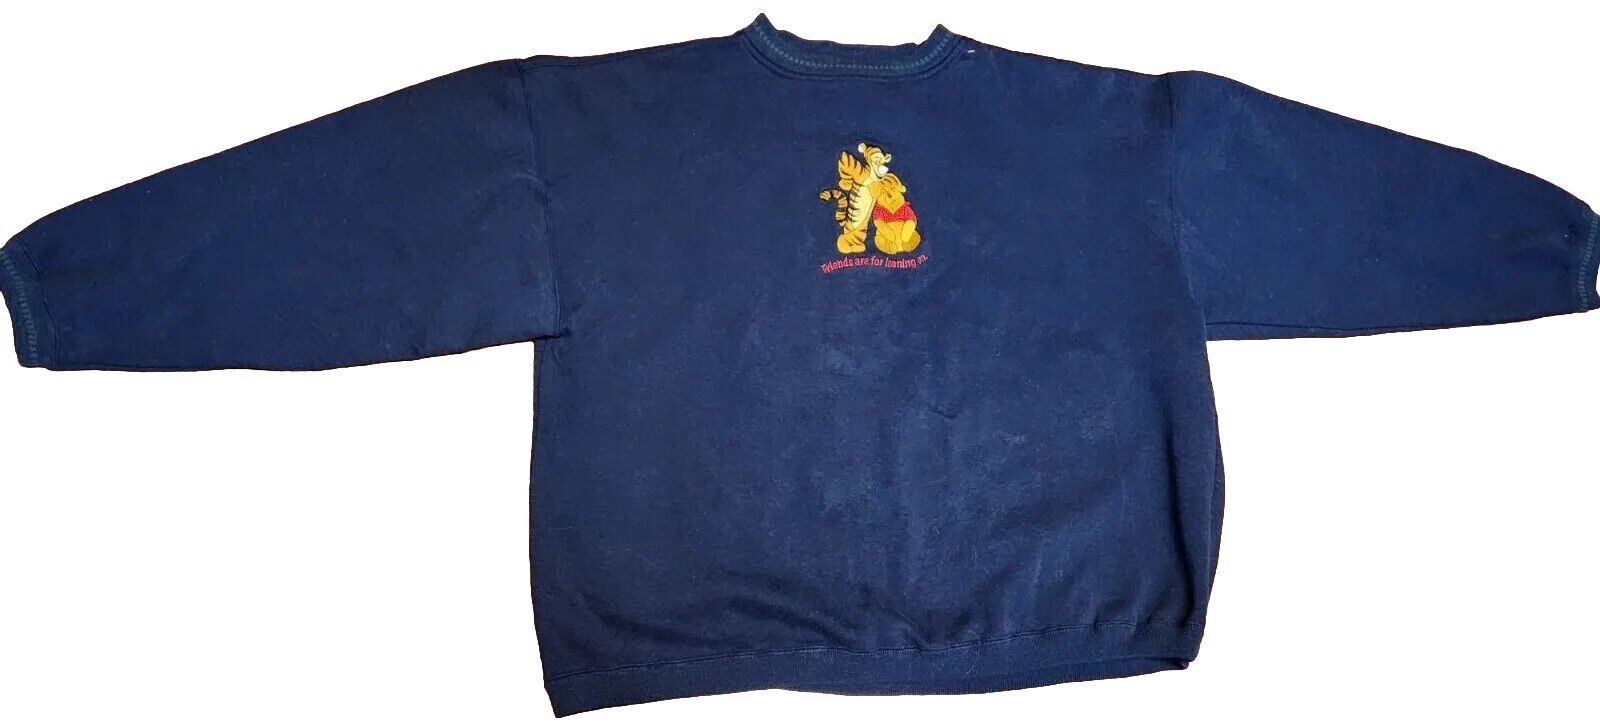 Winnie The Pooh Sweatshirt Adult 2X Friends Are For Leaning Vintage Embroidered 